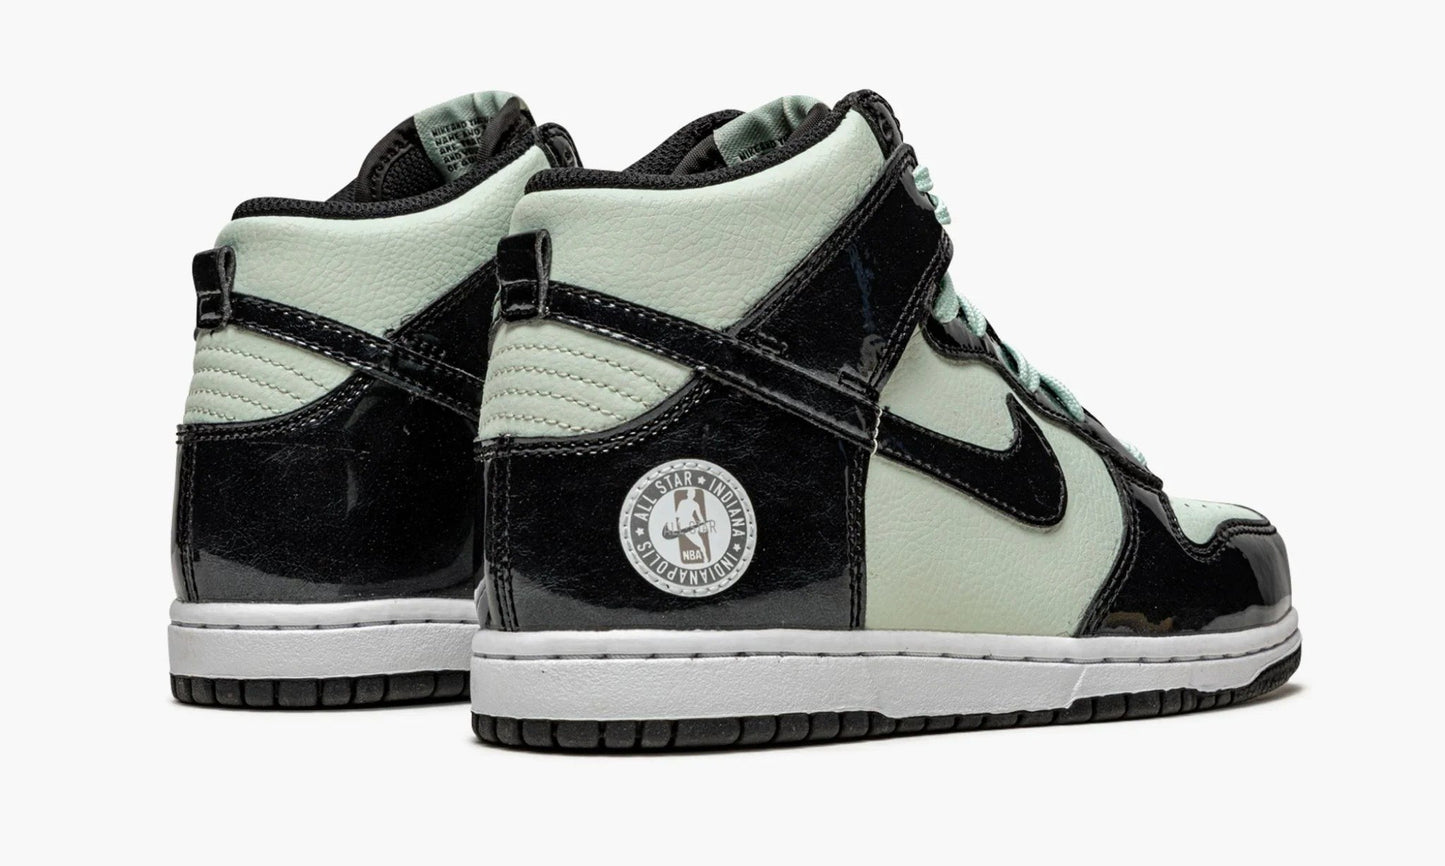 Dunk High SE PS "All Star 2021"